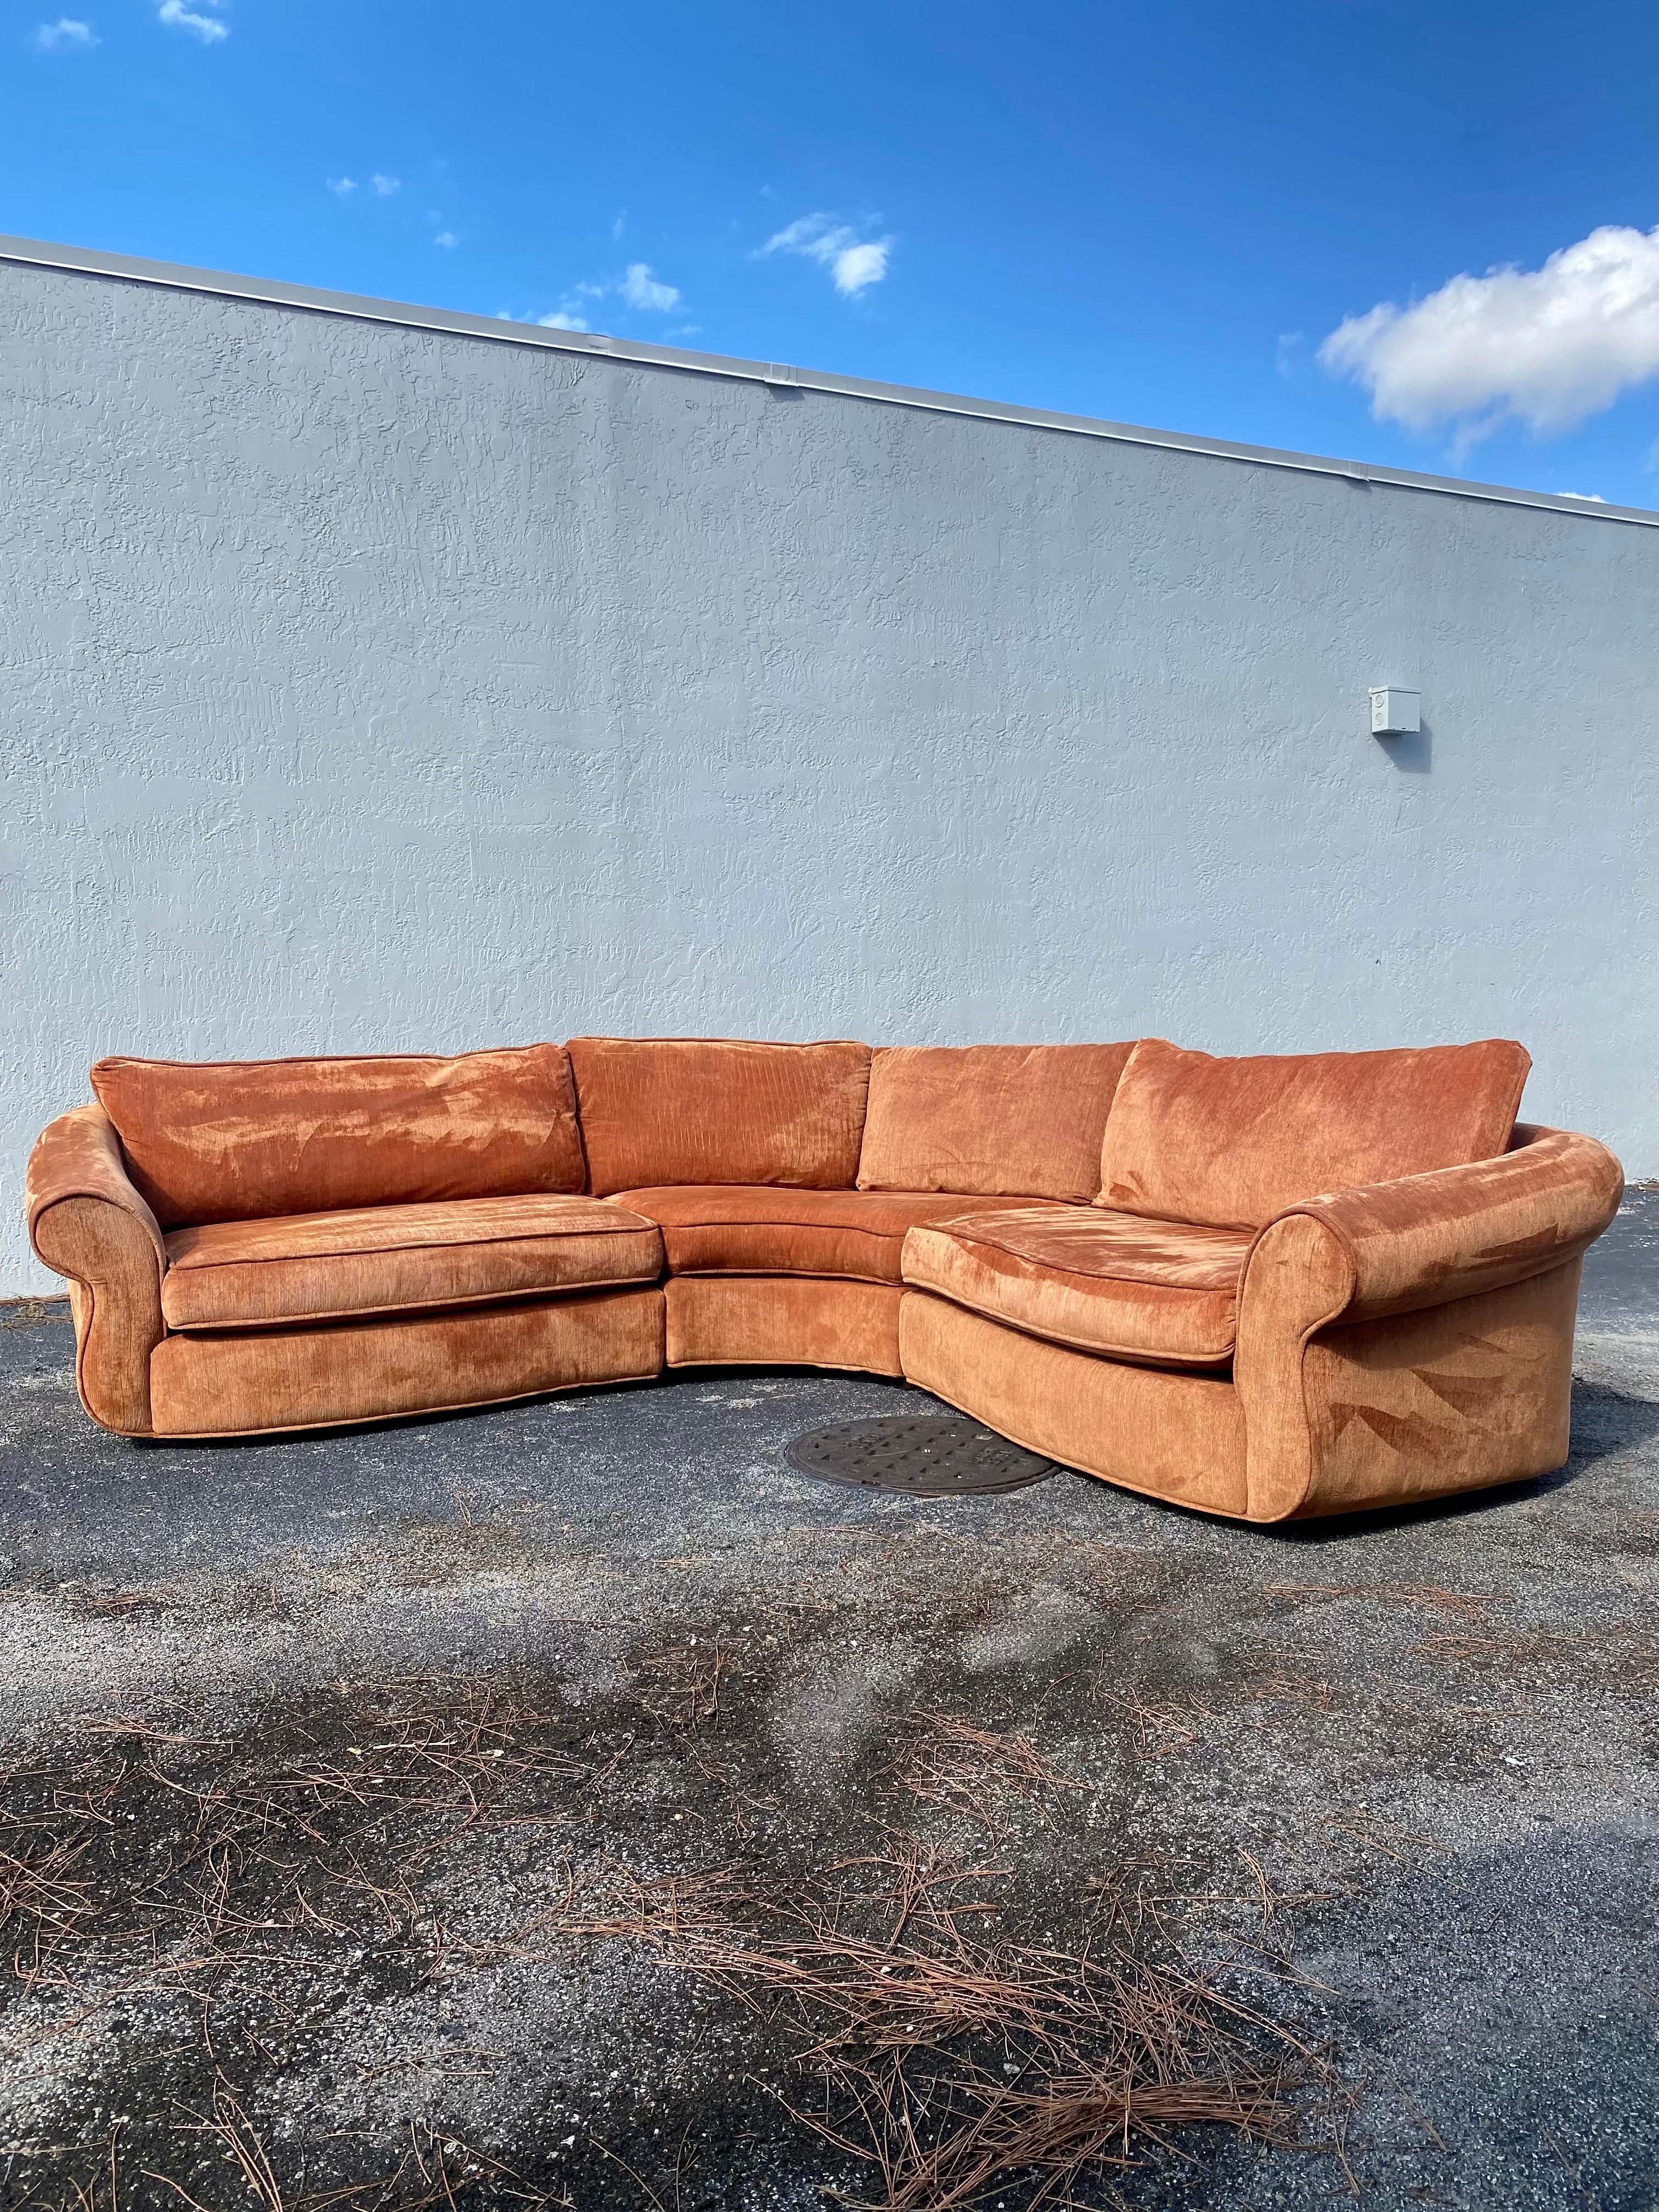 This rare sculturall sectional is statement piece which is also extremely comfortable and packed with personality! Just look at the curves and lines on this beauty! Stunning plush overstuffed cushioning and an exceptionally deep seat lend inviting